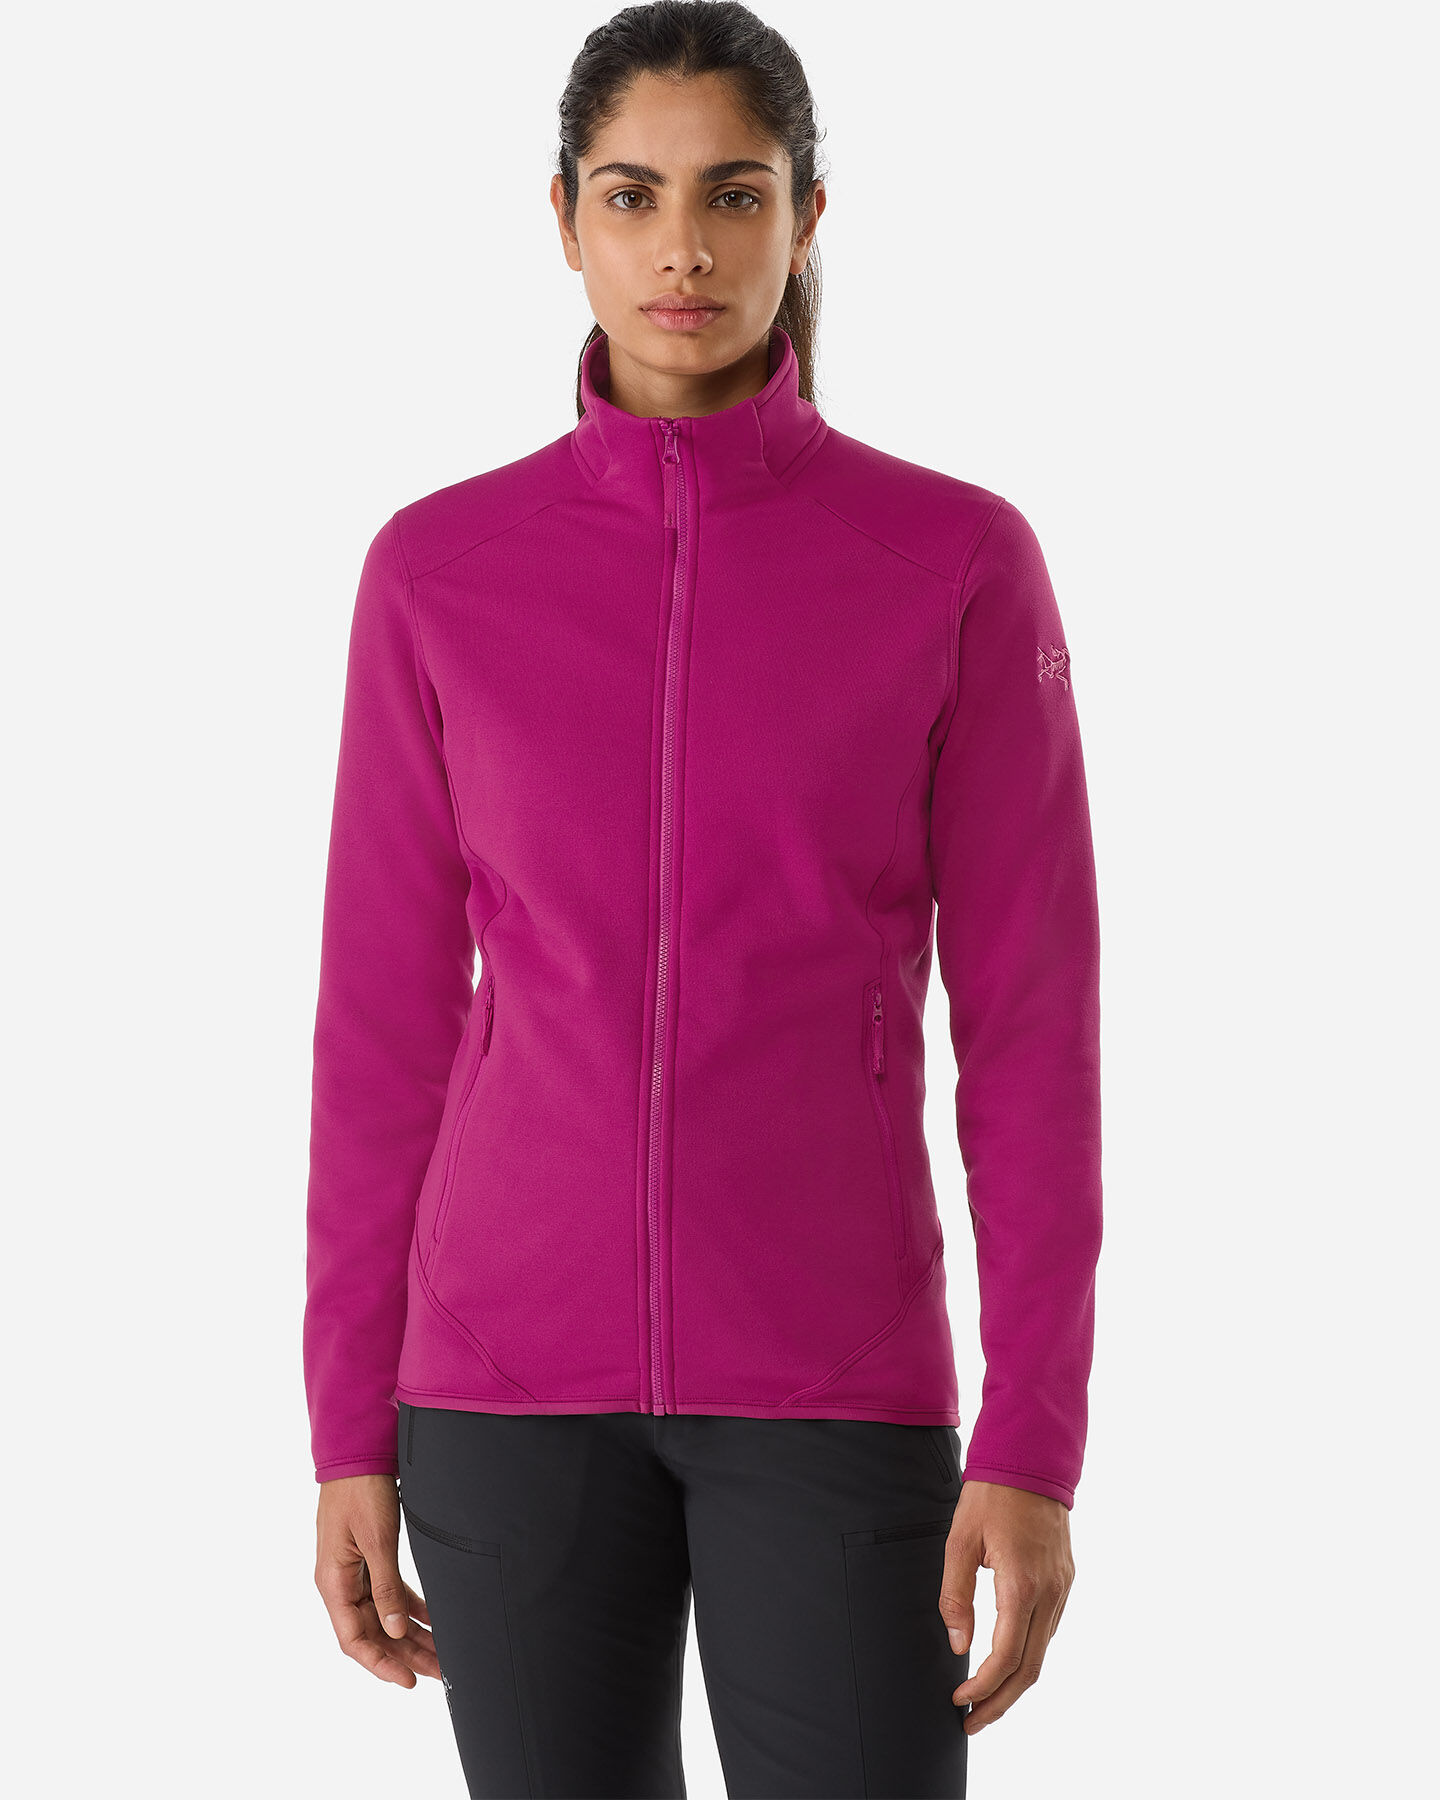  Pile ARC'TERYX KYANITE SYNTH W S4114898|1|S scatto 1